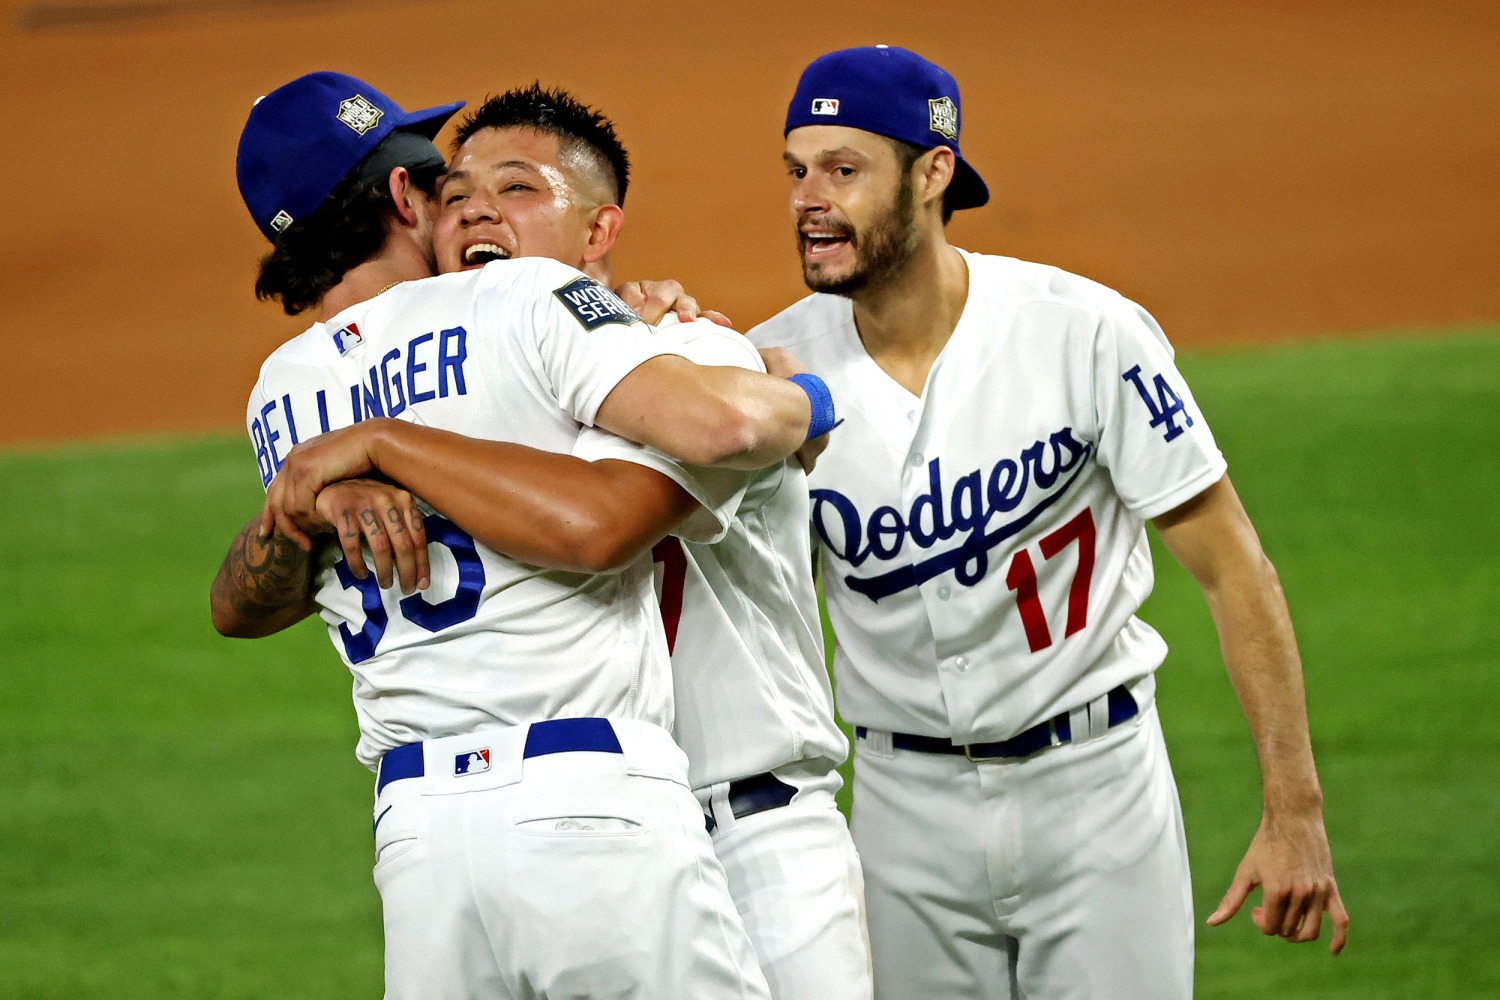 The Los Angeles Dodgers Win the 2020 World Series